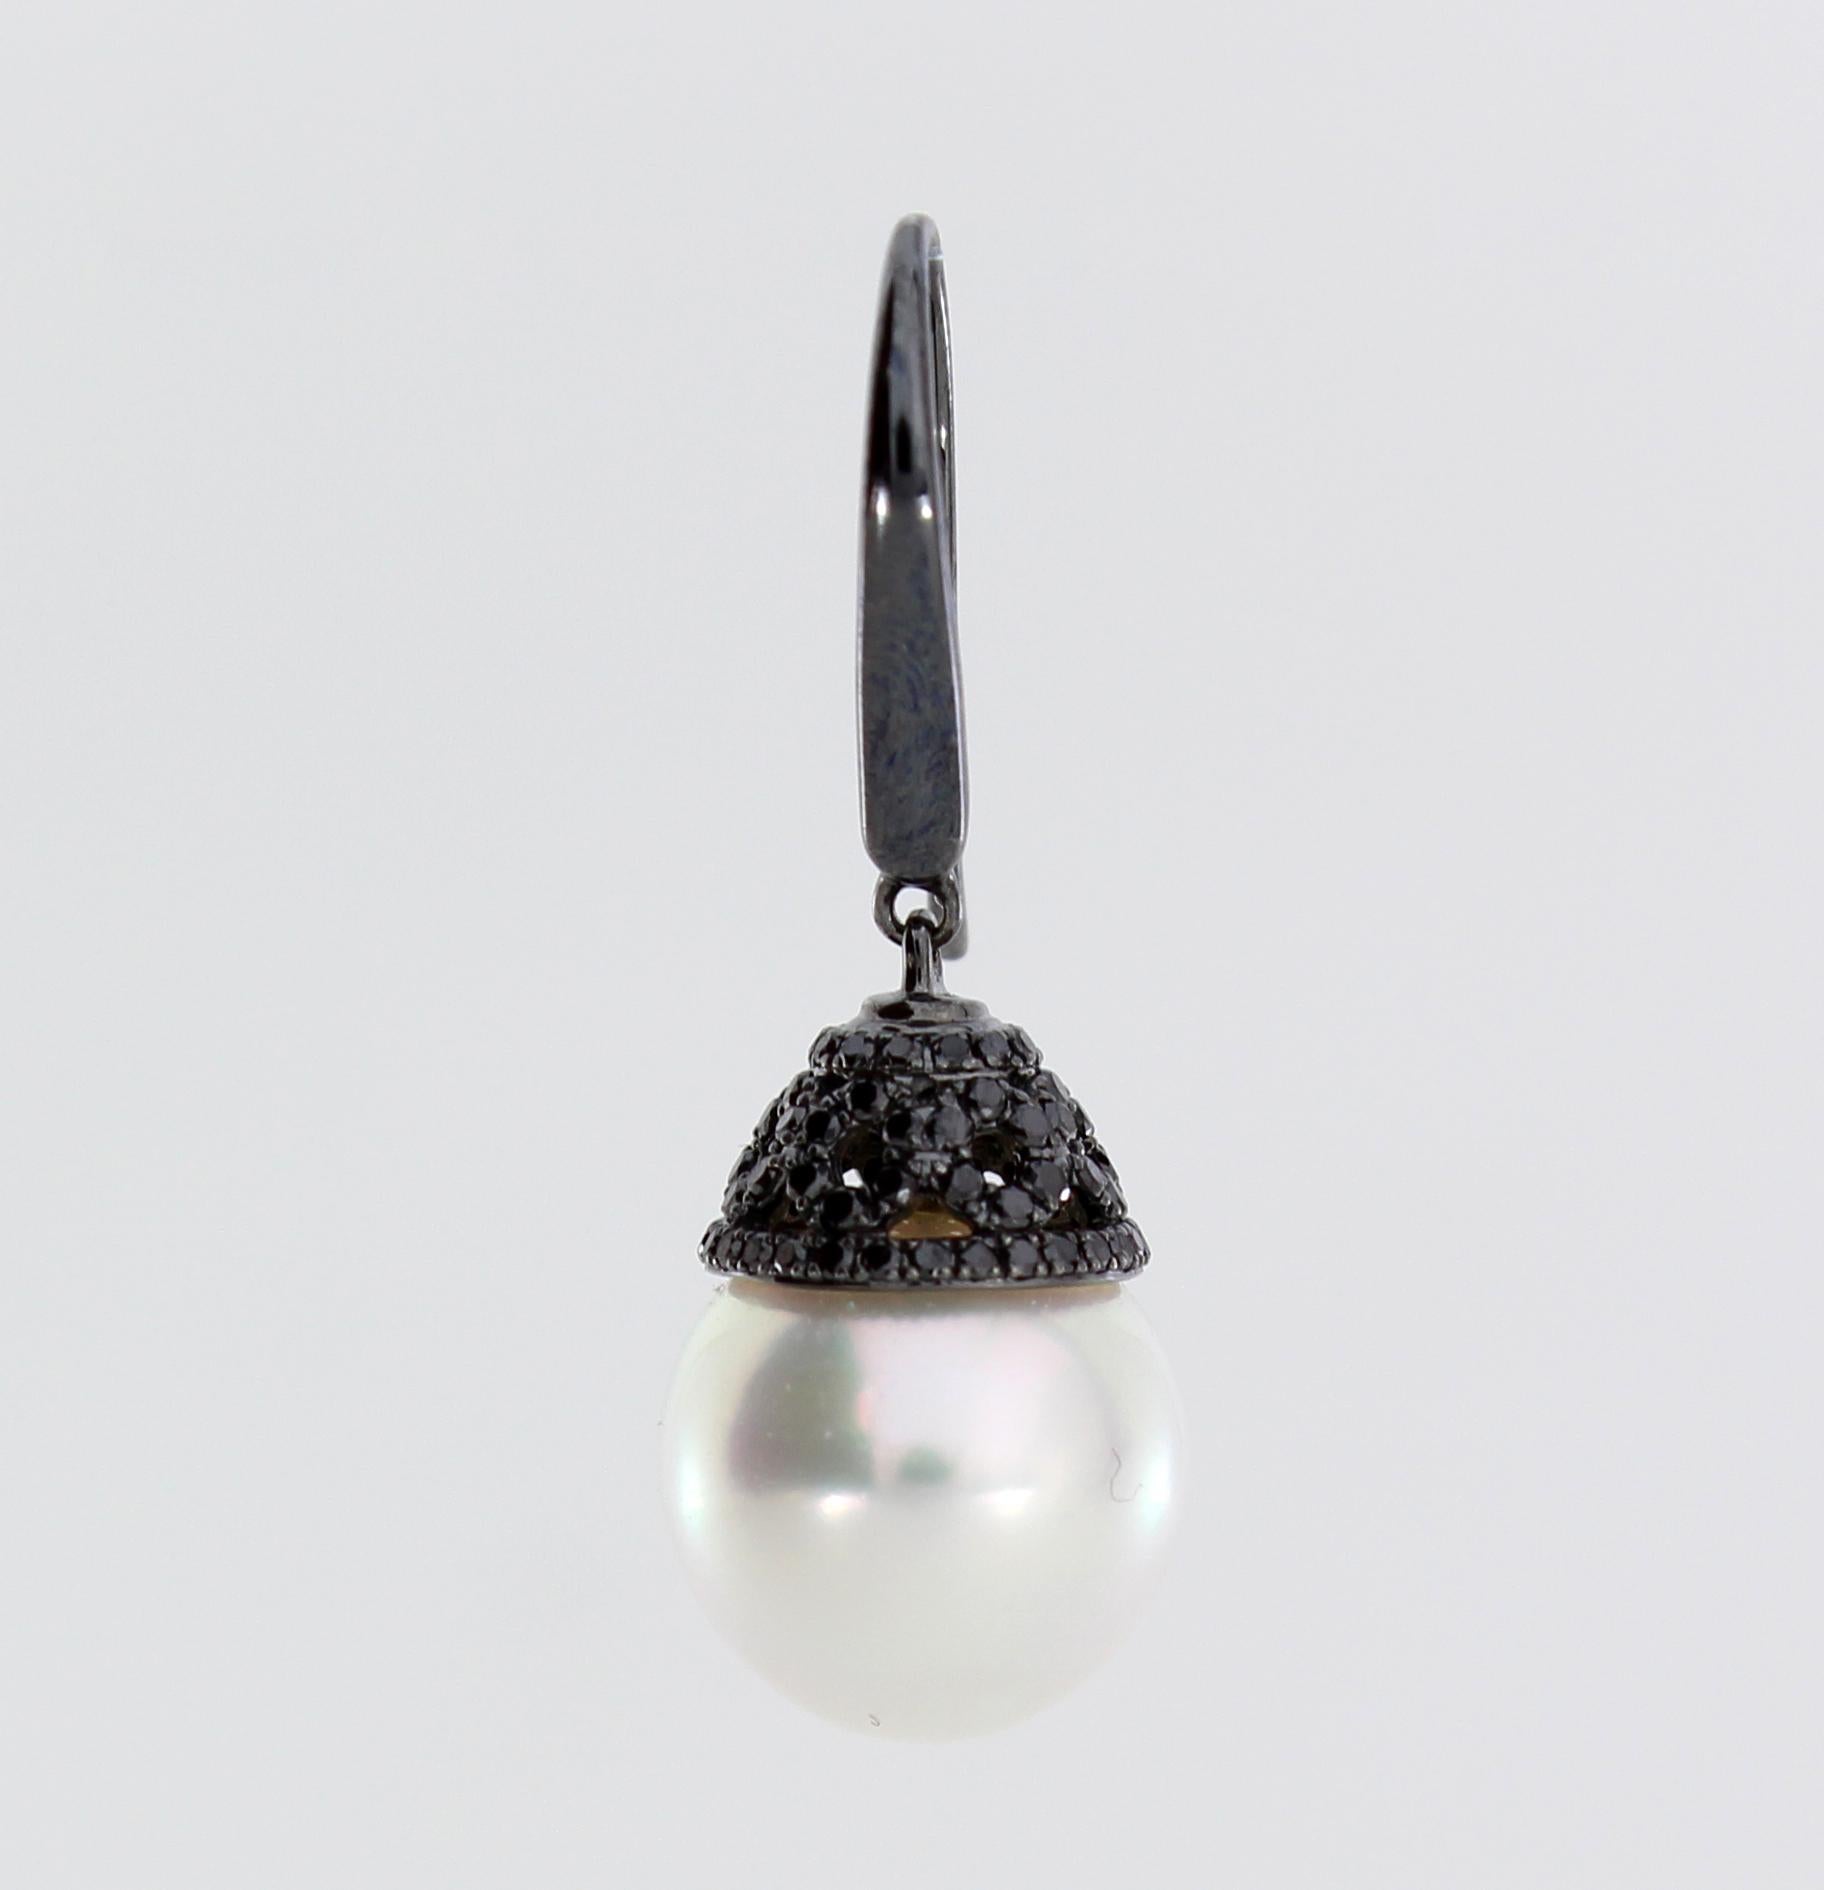 18k Black Gold with Black Diamonds (0.875ct) and 12mm White Drop South Sea Pearls. 